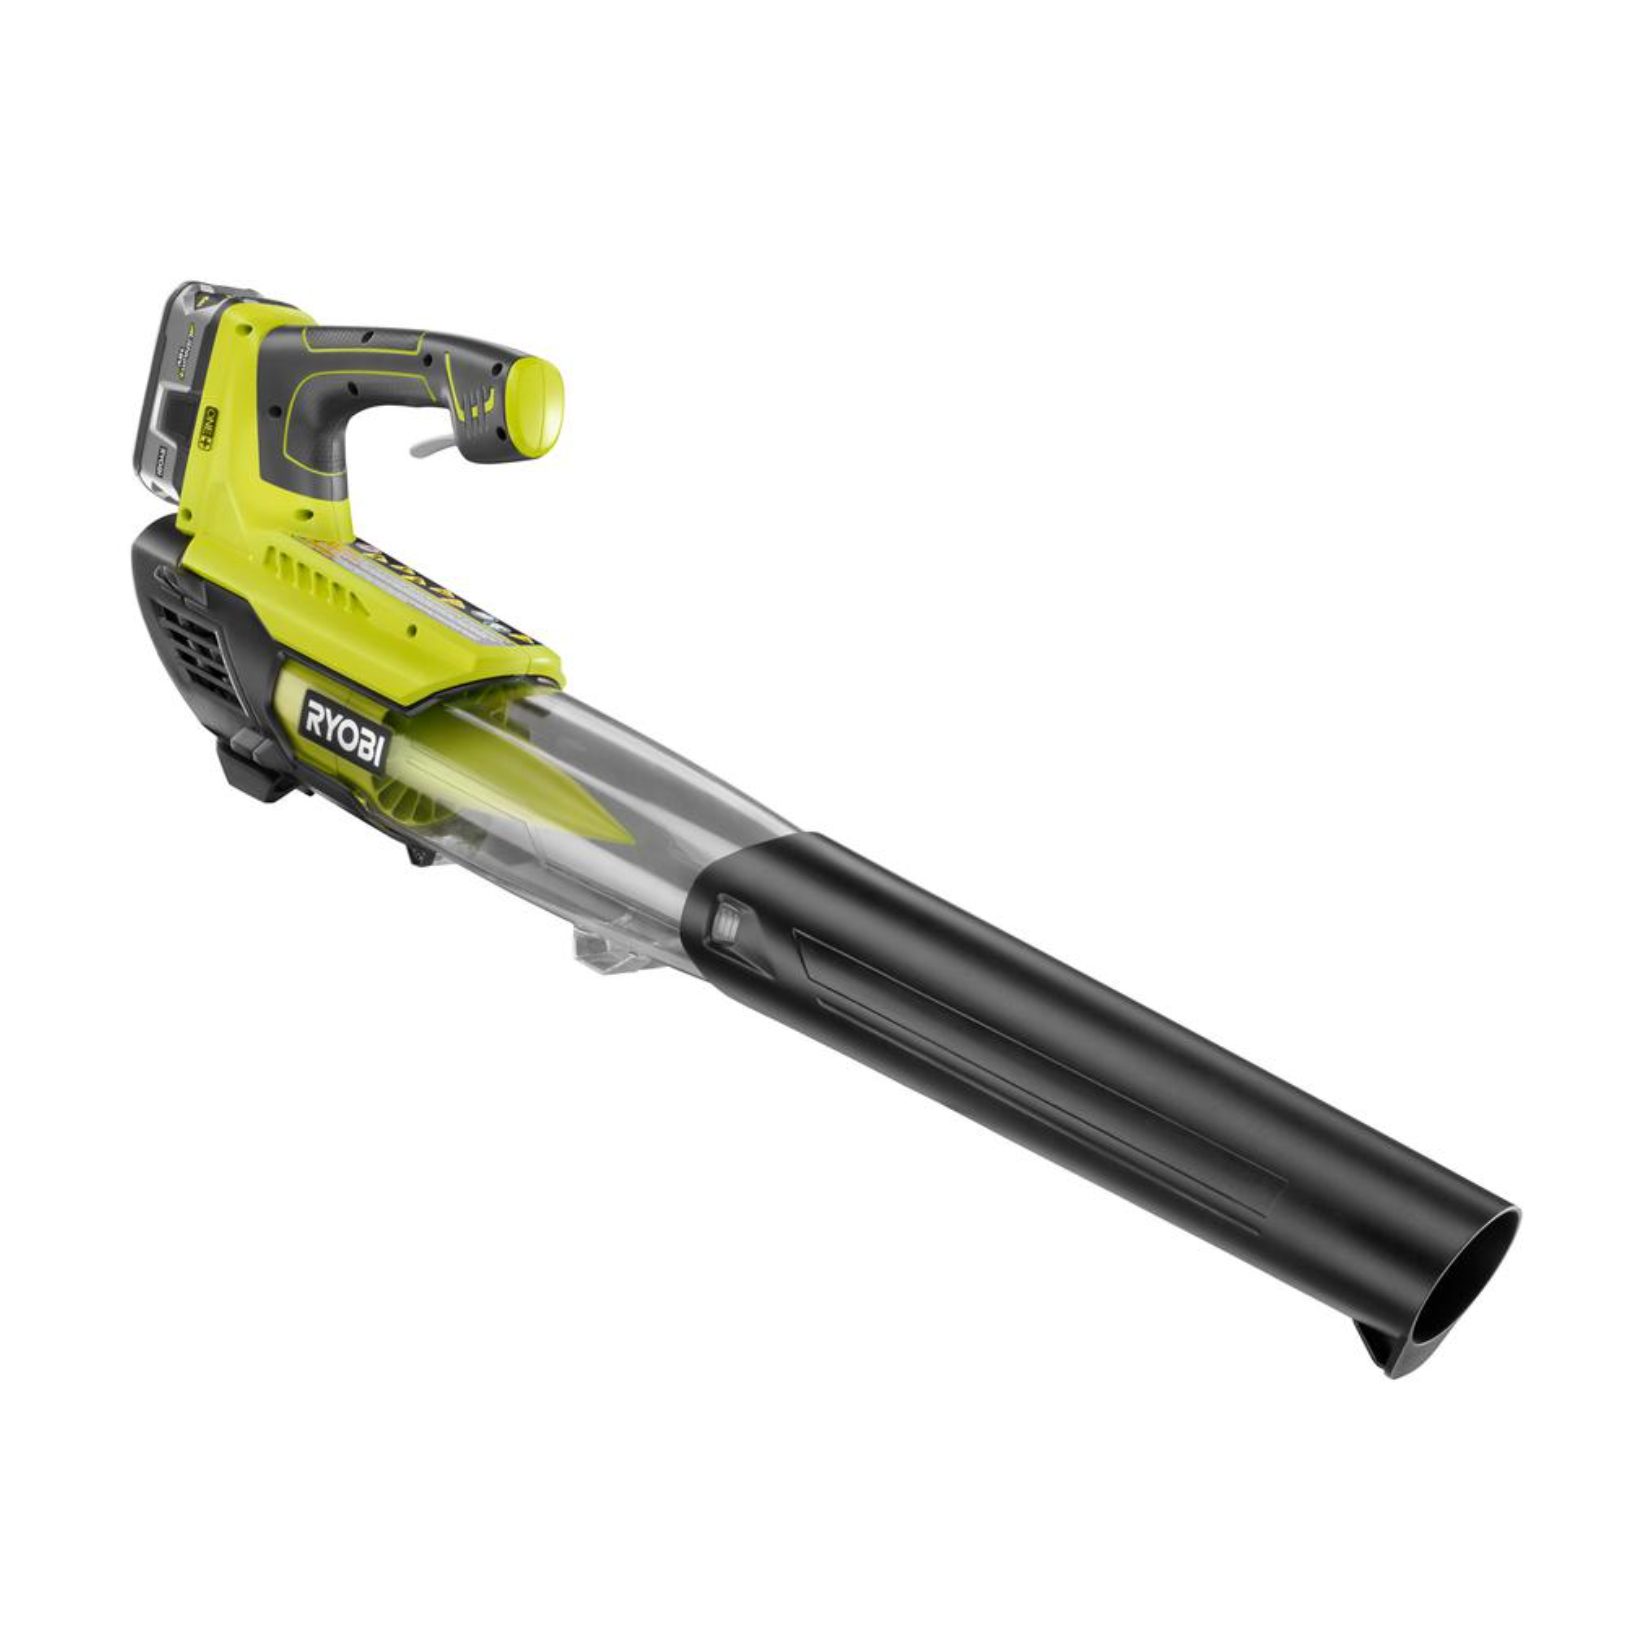 All About RYOBI Cordless Leaf Blower on Sale for Labor day